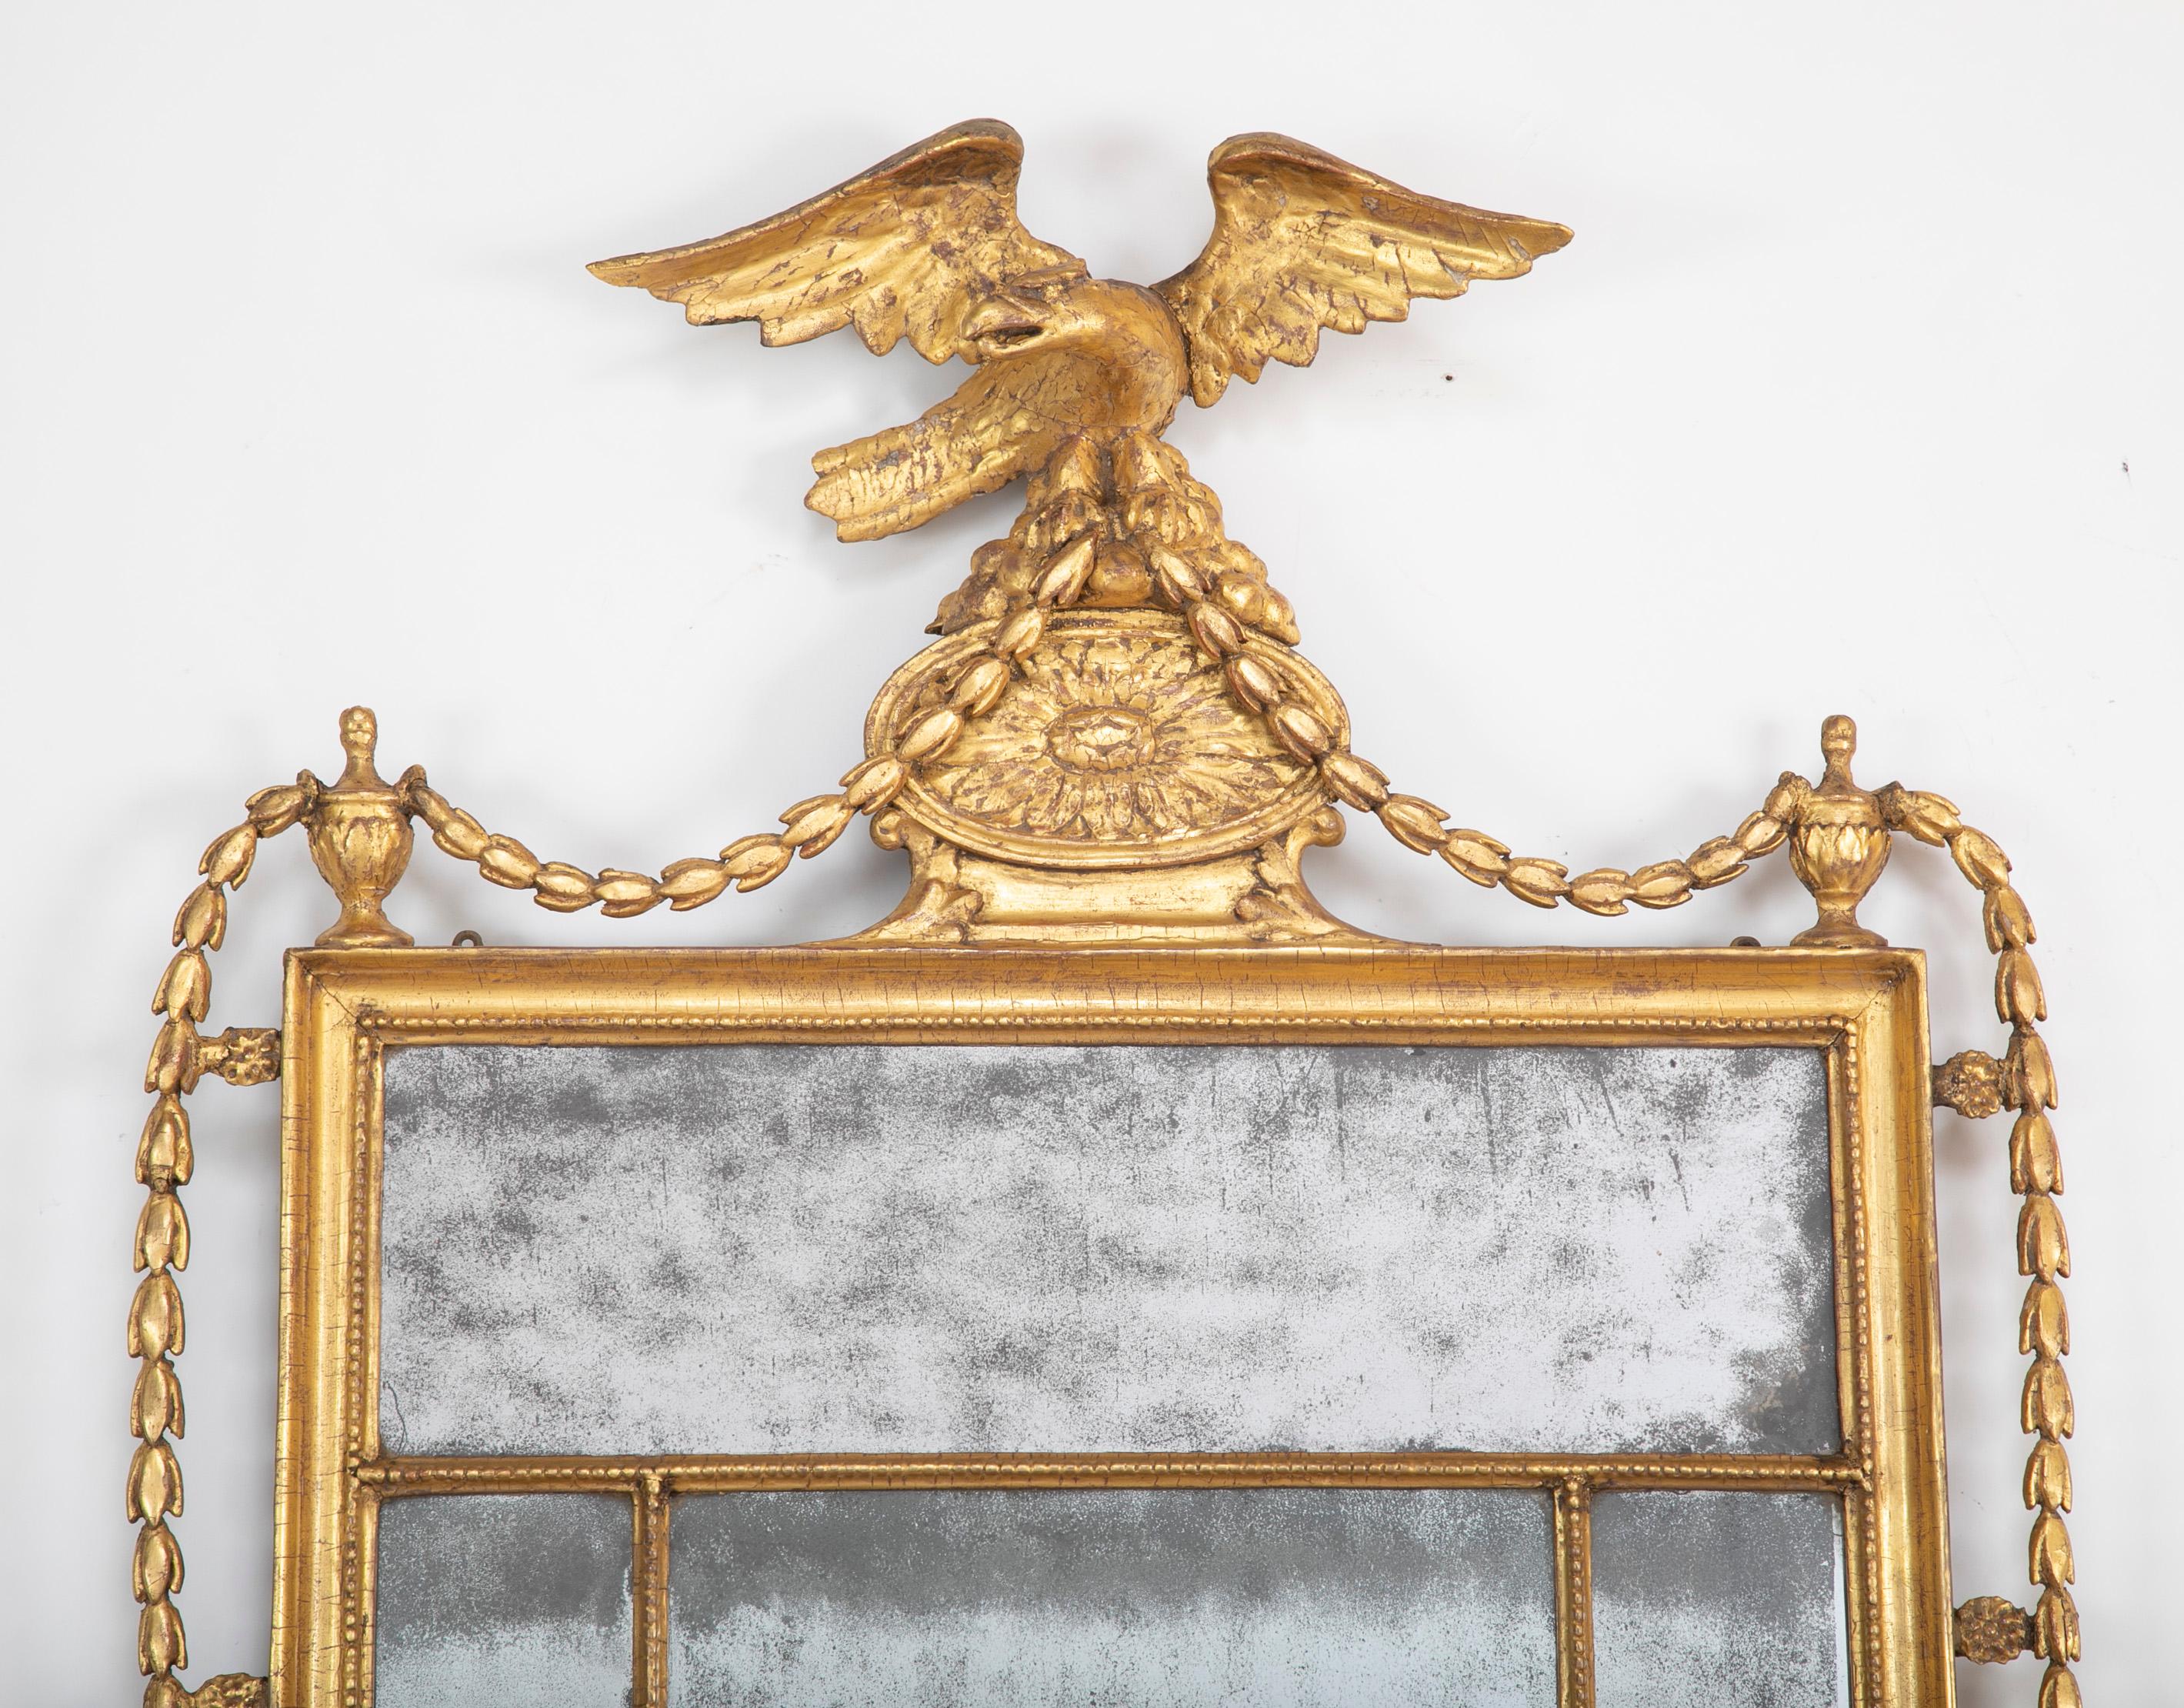 Early 19th century Irish or English giltwood mirror with eagle and old, probably original, glass panels, circa 1810-1815.

FW 1675.